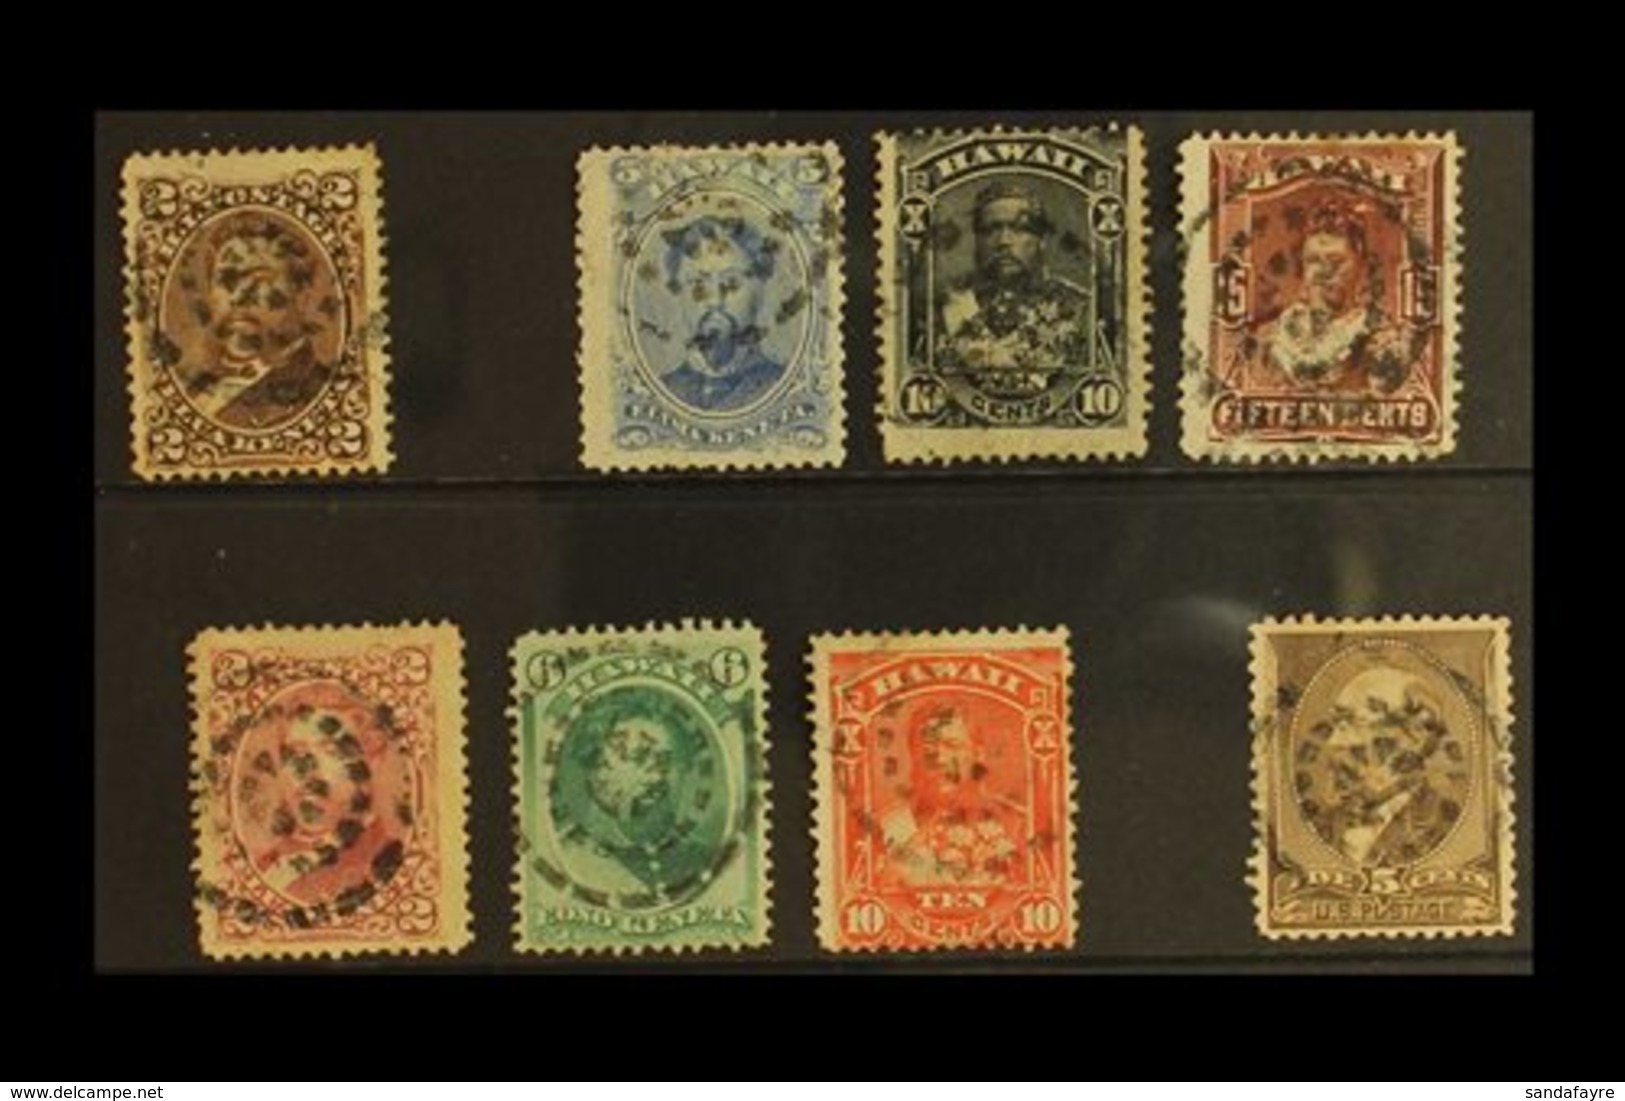 POSTMARKS  DISTINCTIVE TARGET STYLE CANCEL On Range Of 1875-86 Issues, All Different With Values To 15c, Plus USA 1882 5 - Hawaii